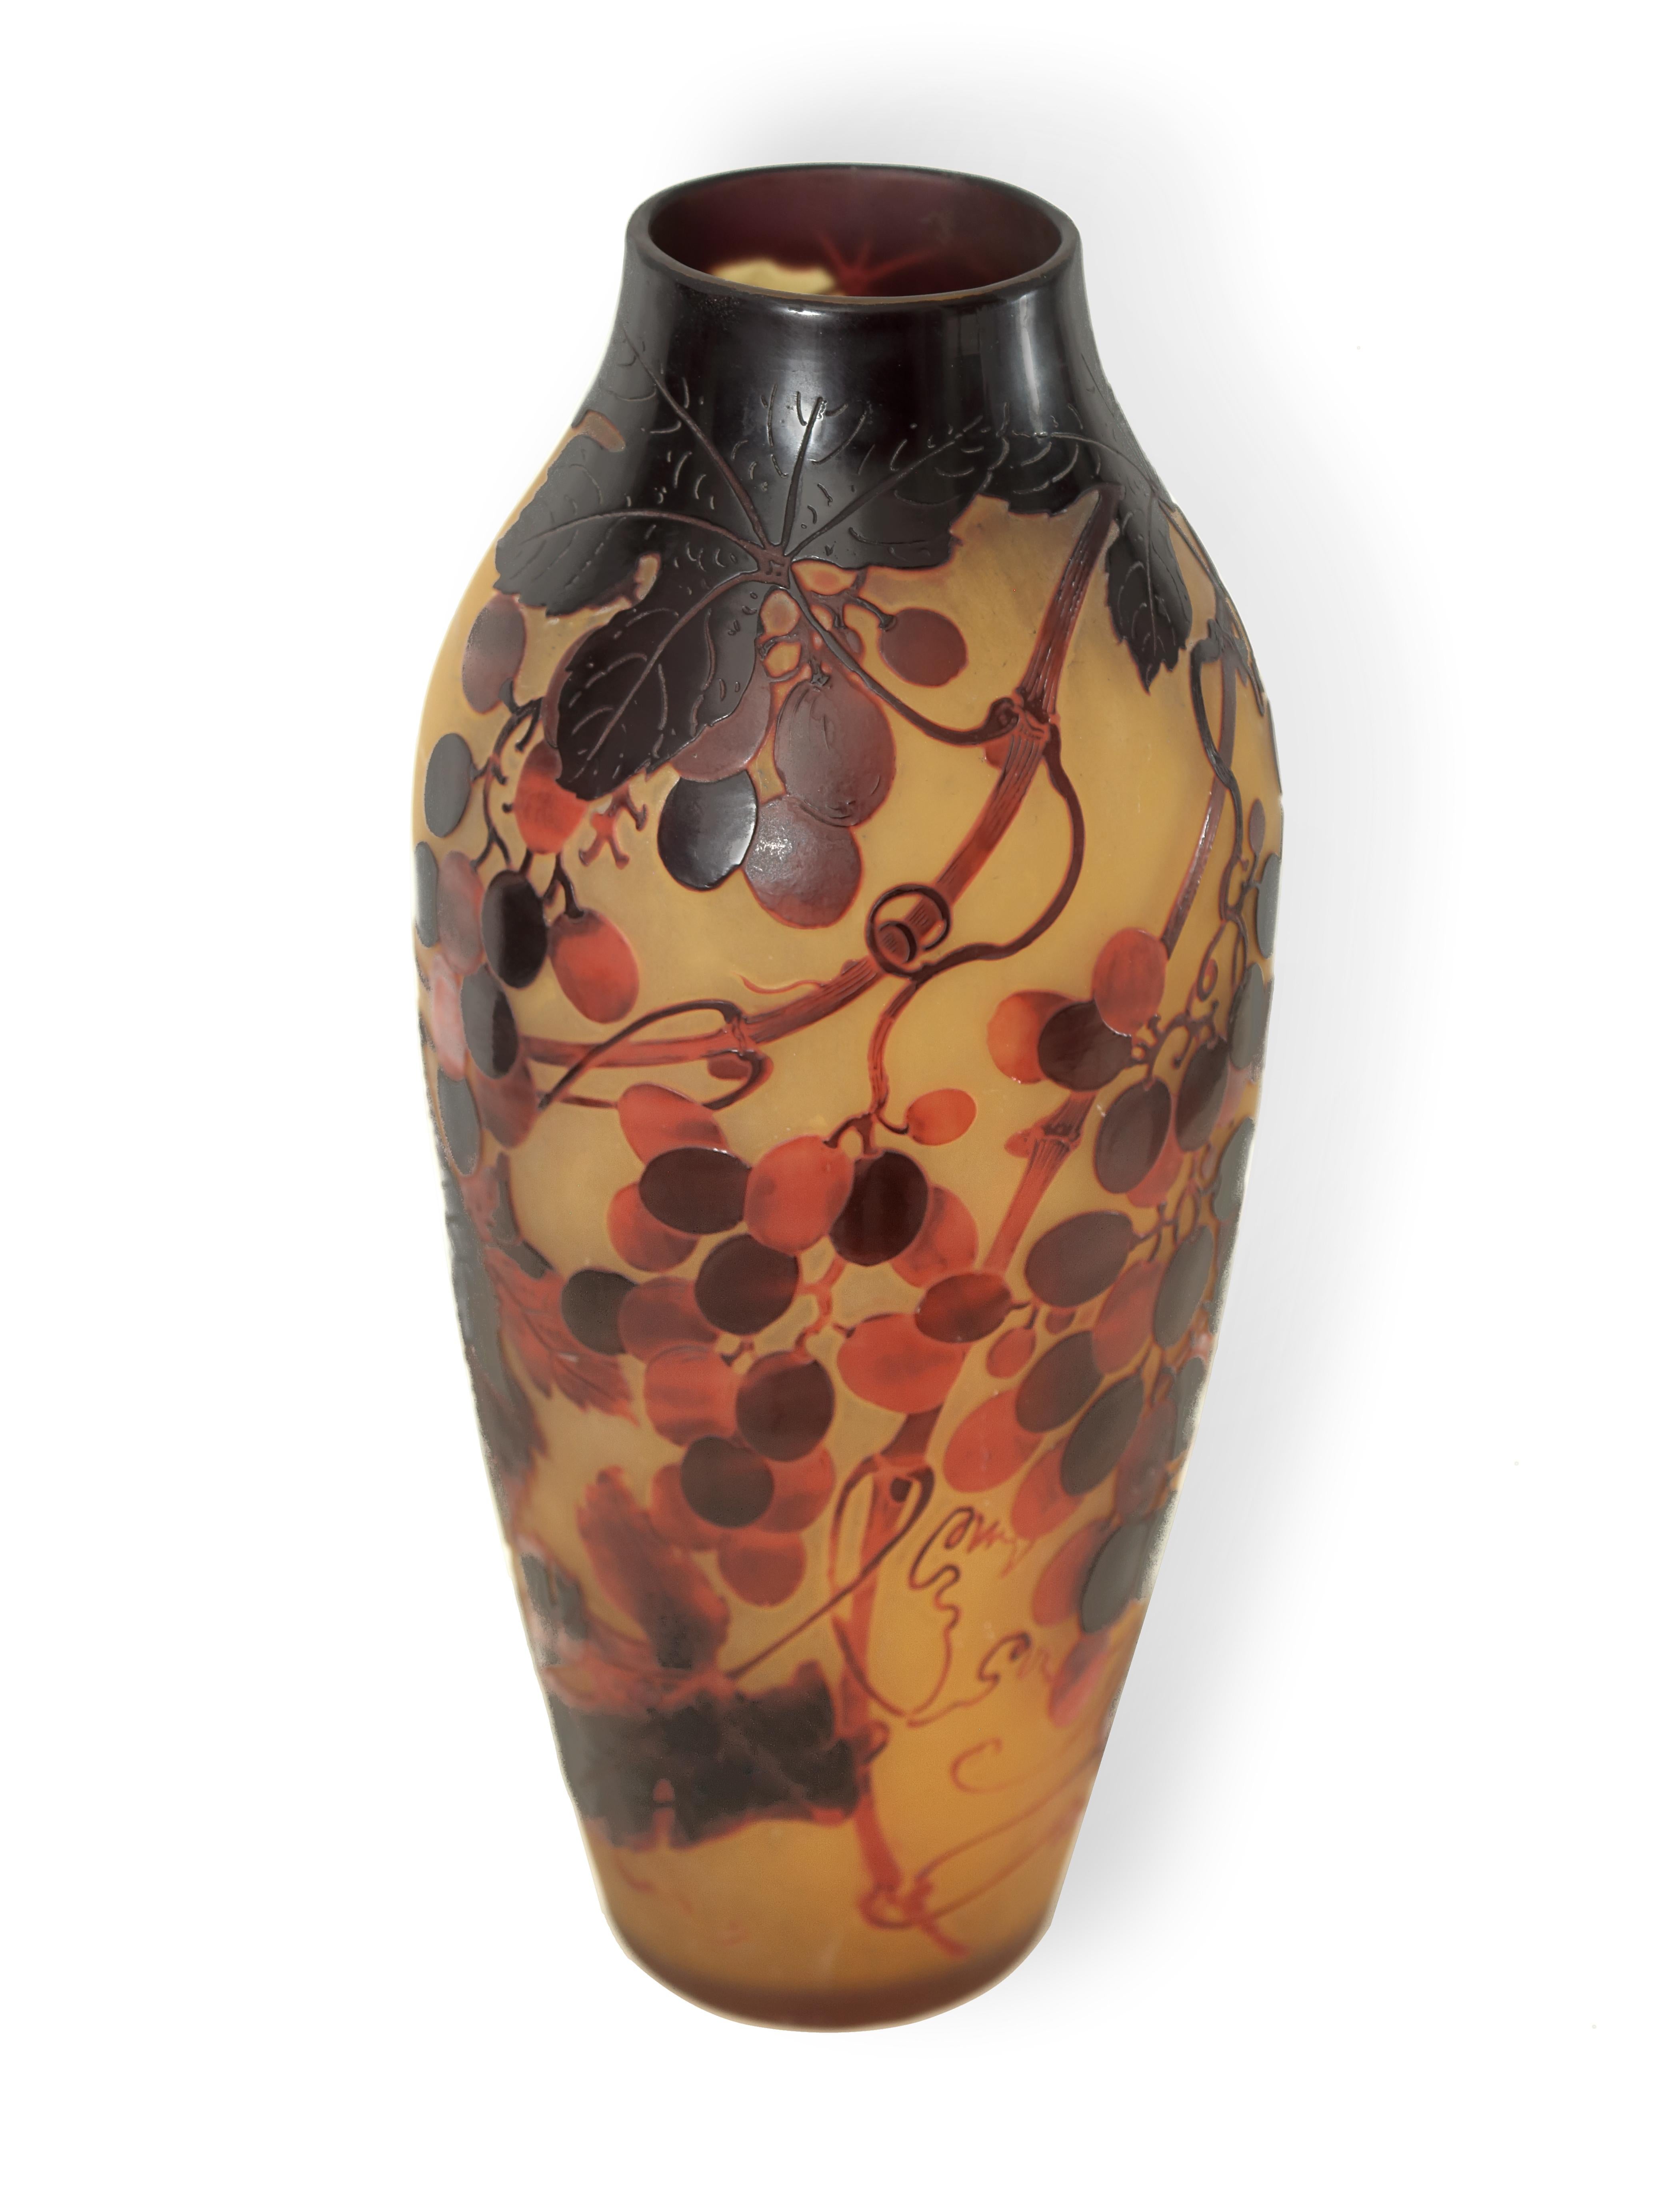 A monumental acid-etched cameo Art Noveau red and yellow art glass scenic vase. Beautiful Art Deco-Art Nouveau decorative vase. Condition is good, with wear commensurate with age and use.